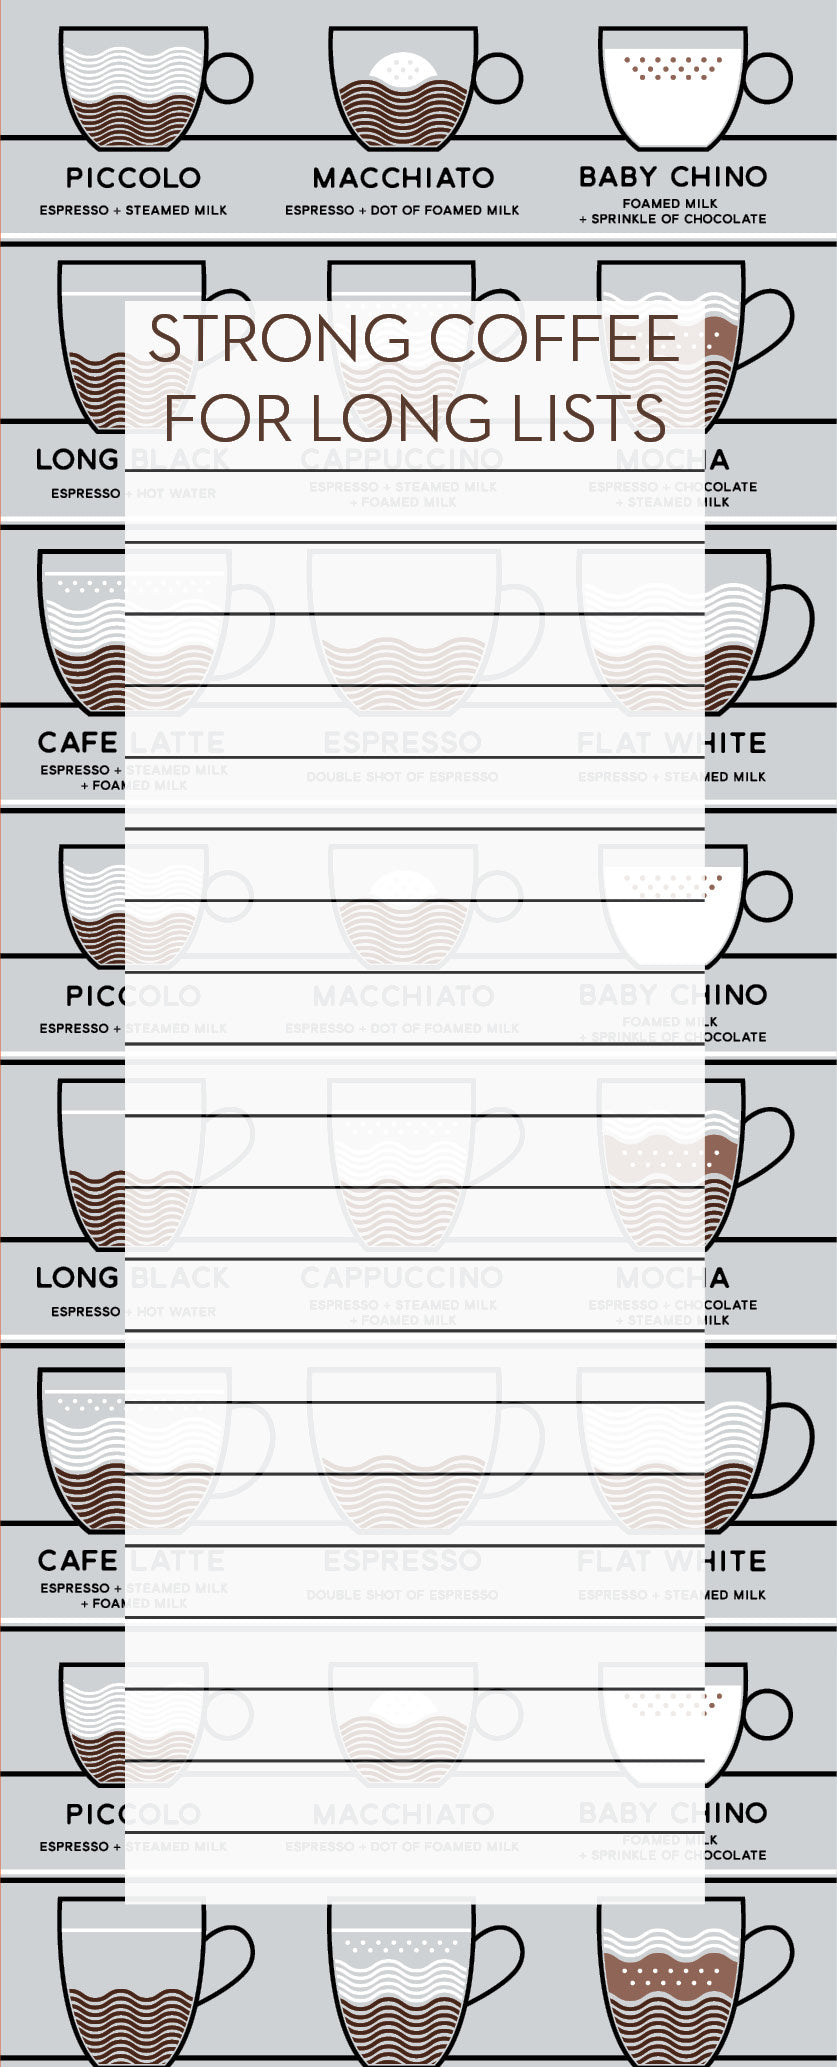 Jotter - Strong Coffee for Long Lists